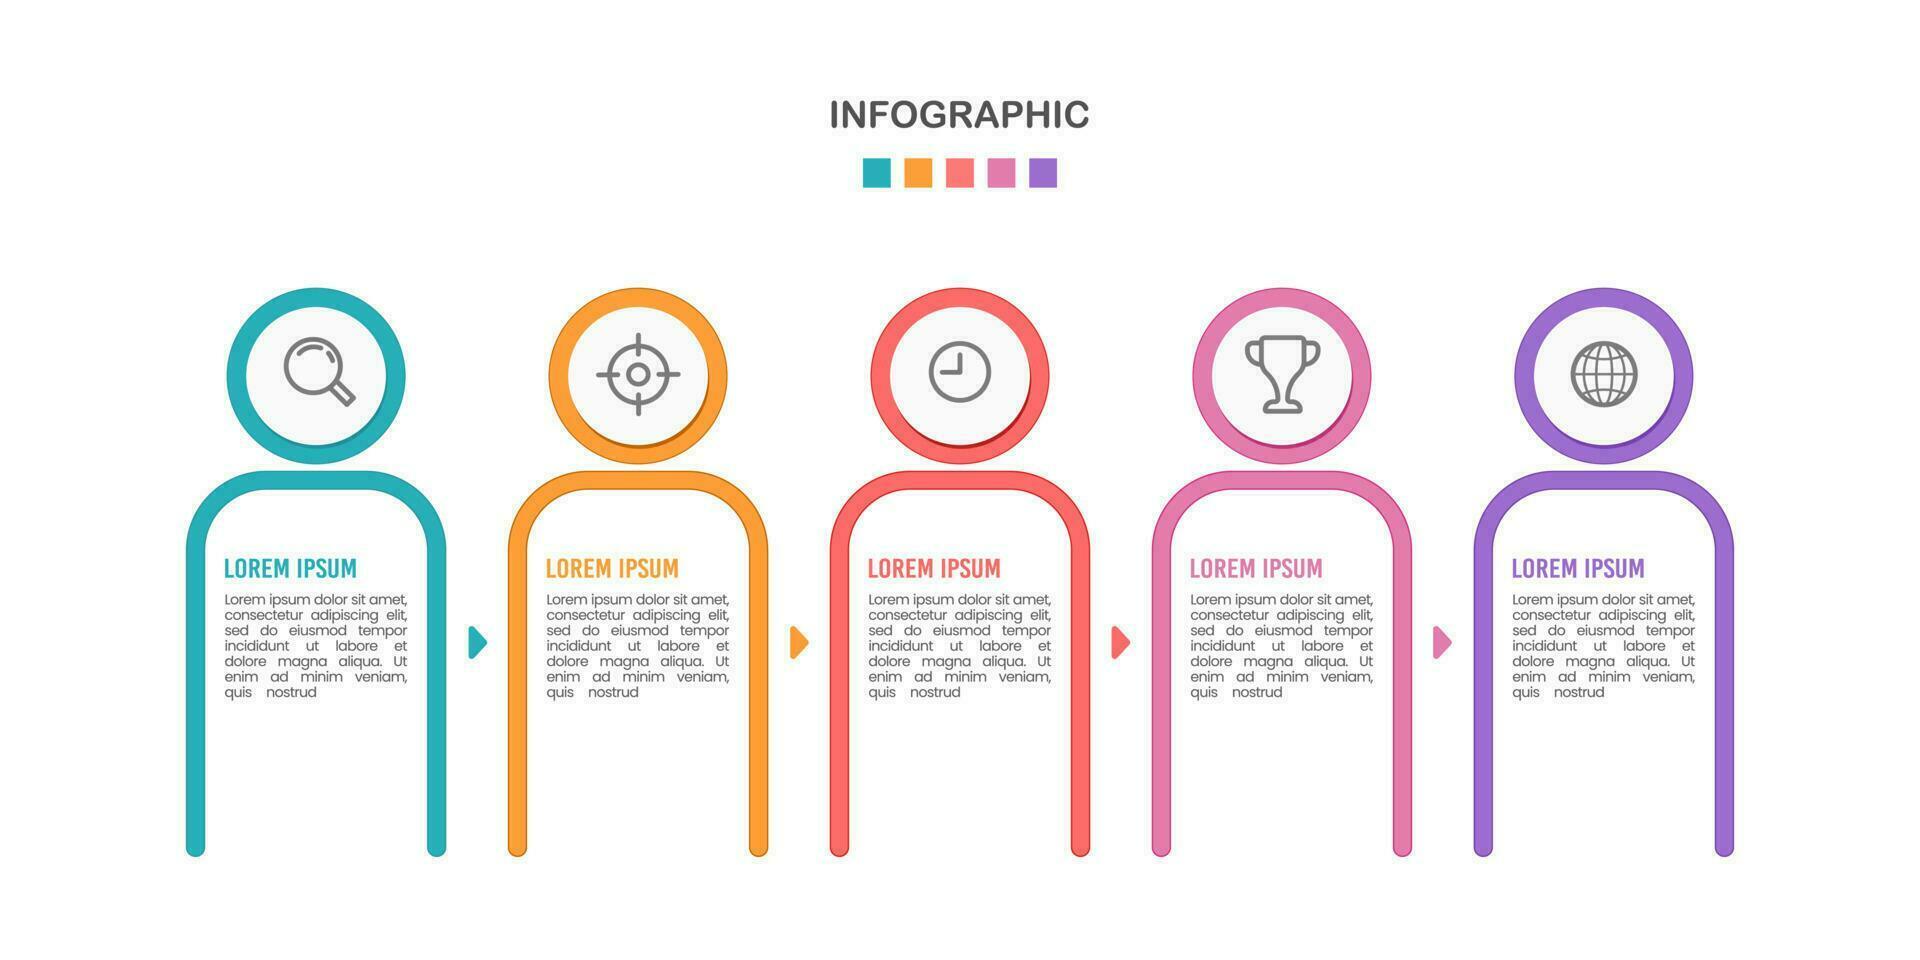 Infographic personal data 5 options. Vector illustration.